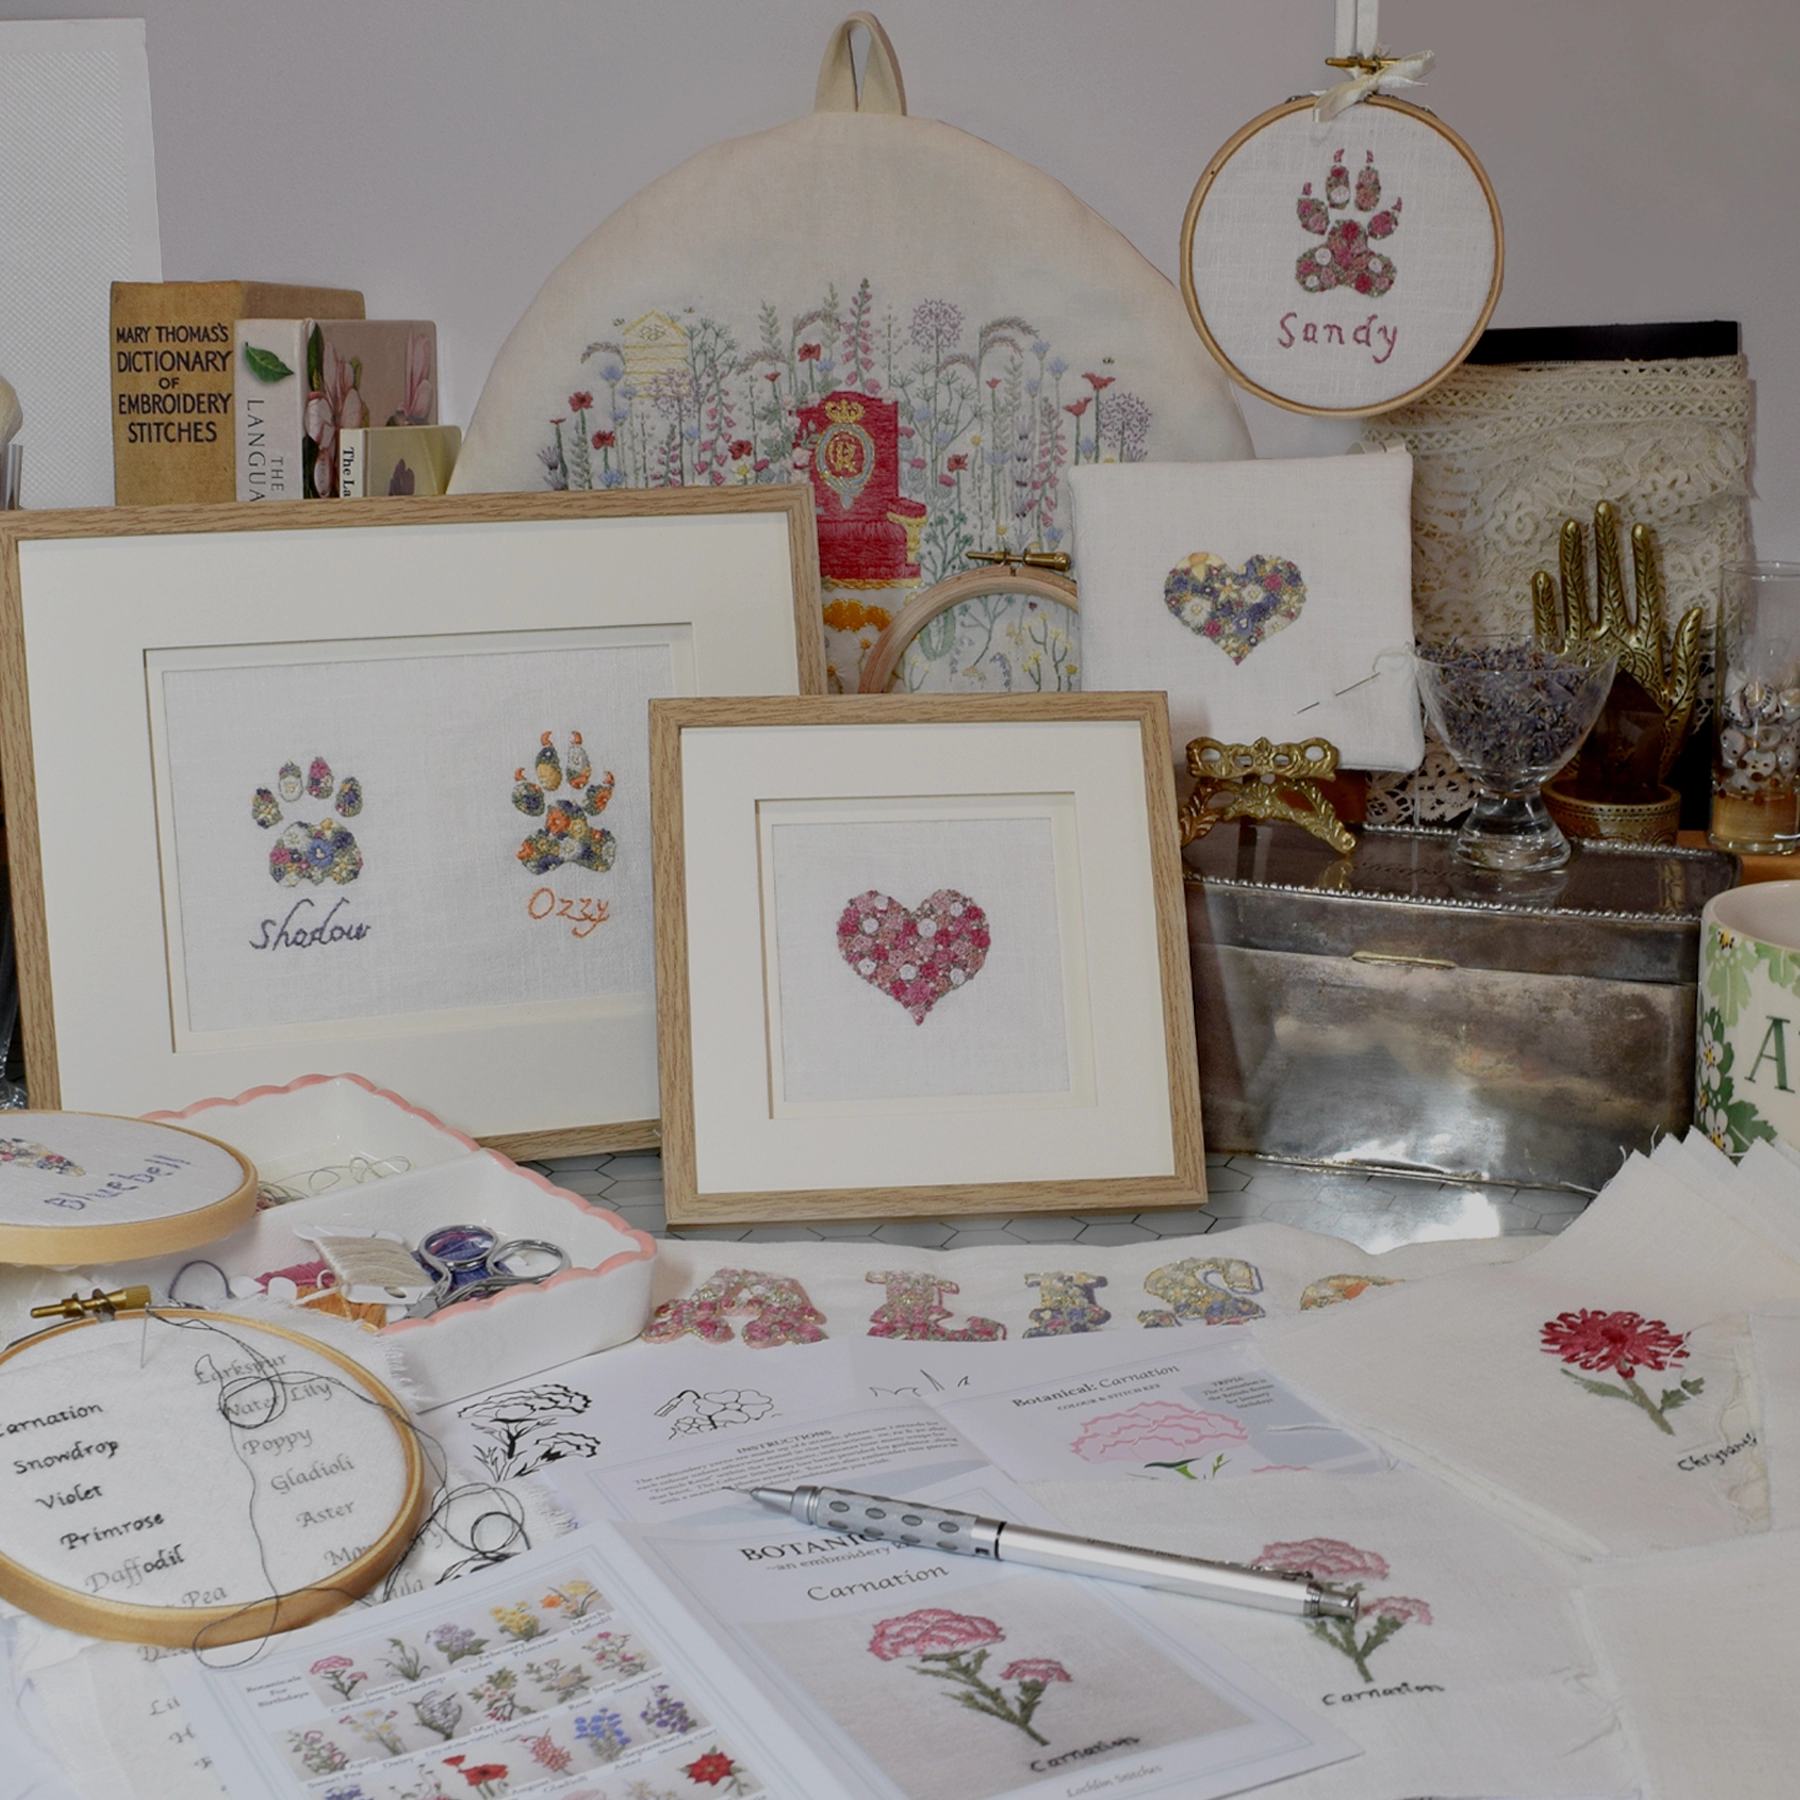 Lochlin Stitches, Designing Embroideries, In the Background are books on Flora and stitching, a King Charles III design, Dog Paw in a hoop, a heart lavender bag being made, and Desk ornaments.  In the Middle are Oak Framed embroidered Cat & Dog Paw, and a pink heart.  In the Foreground are Desgns in progress such as the Botanical Collection to be released later in 2024..